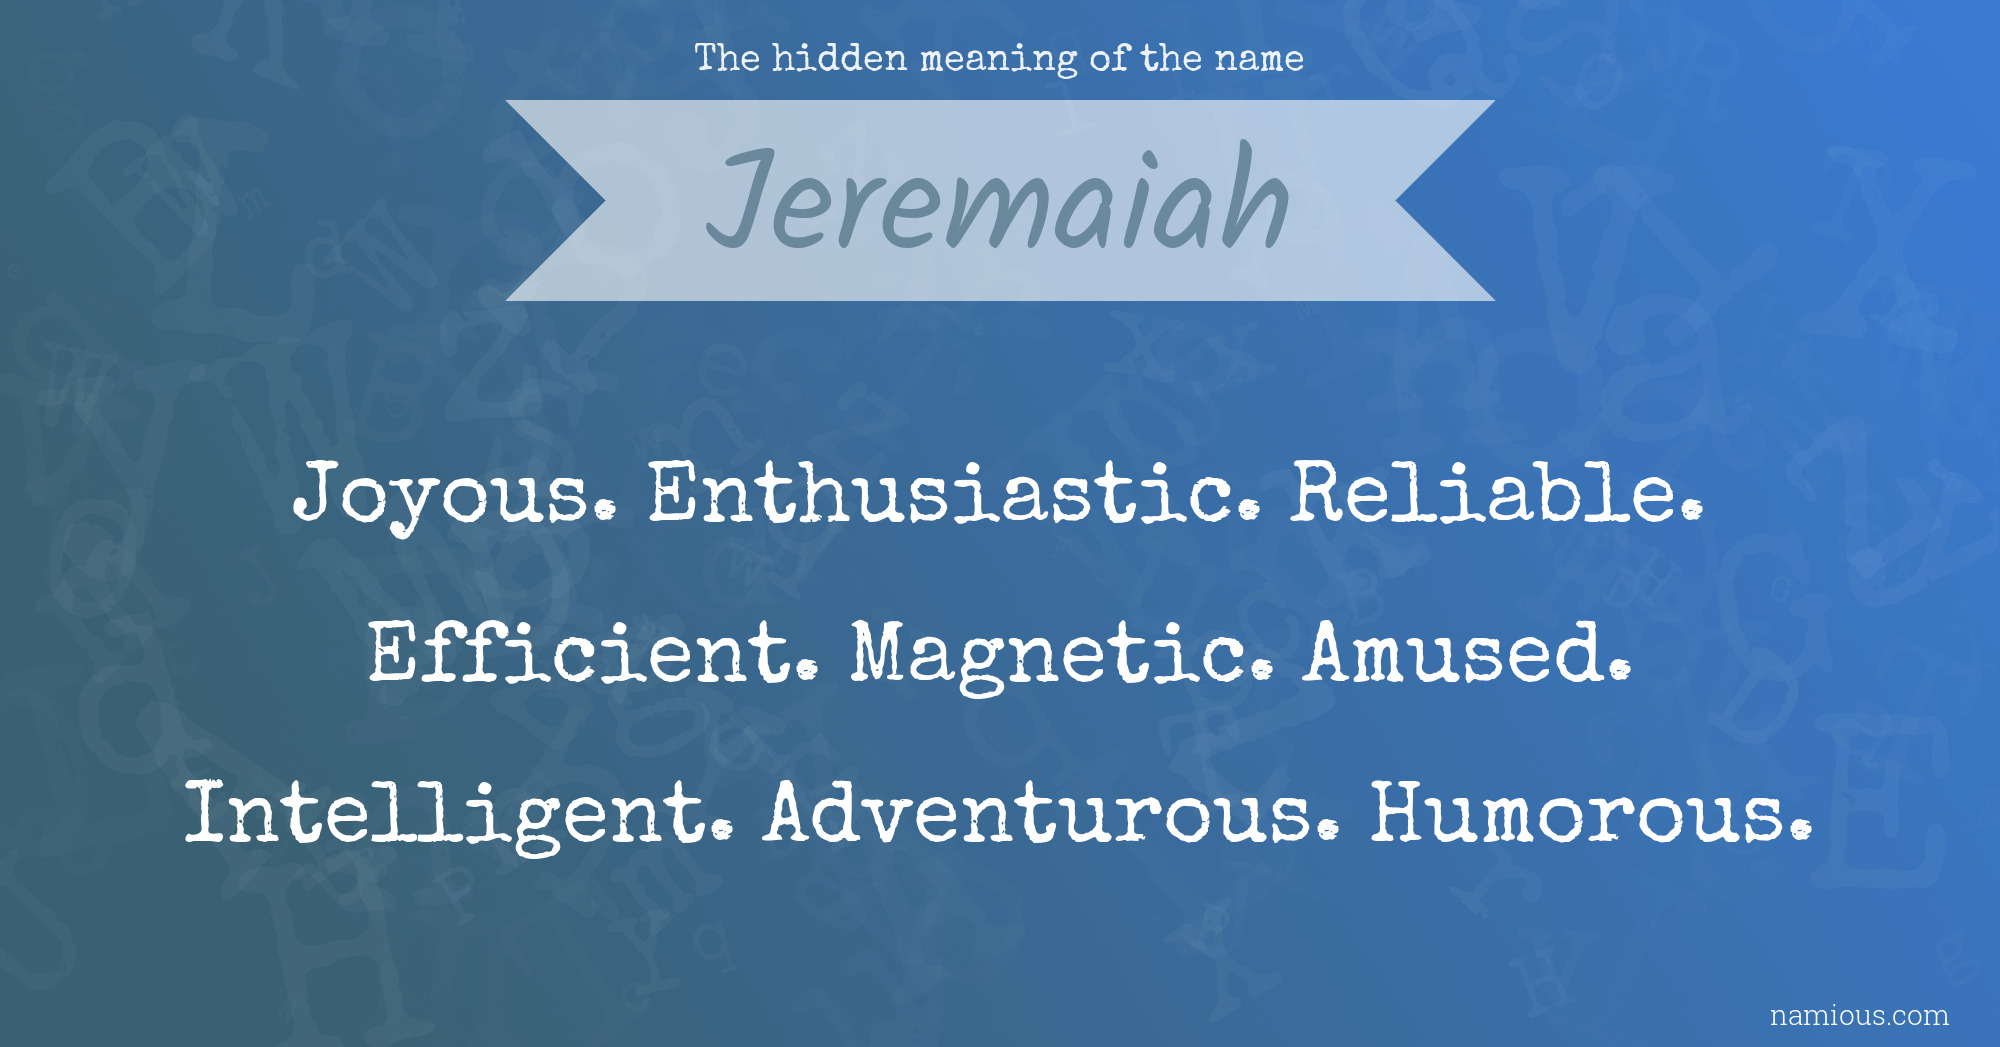 The hidden meaning of the name Jeremaiah